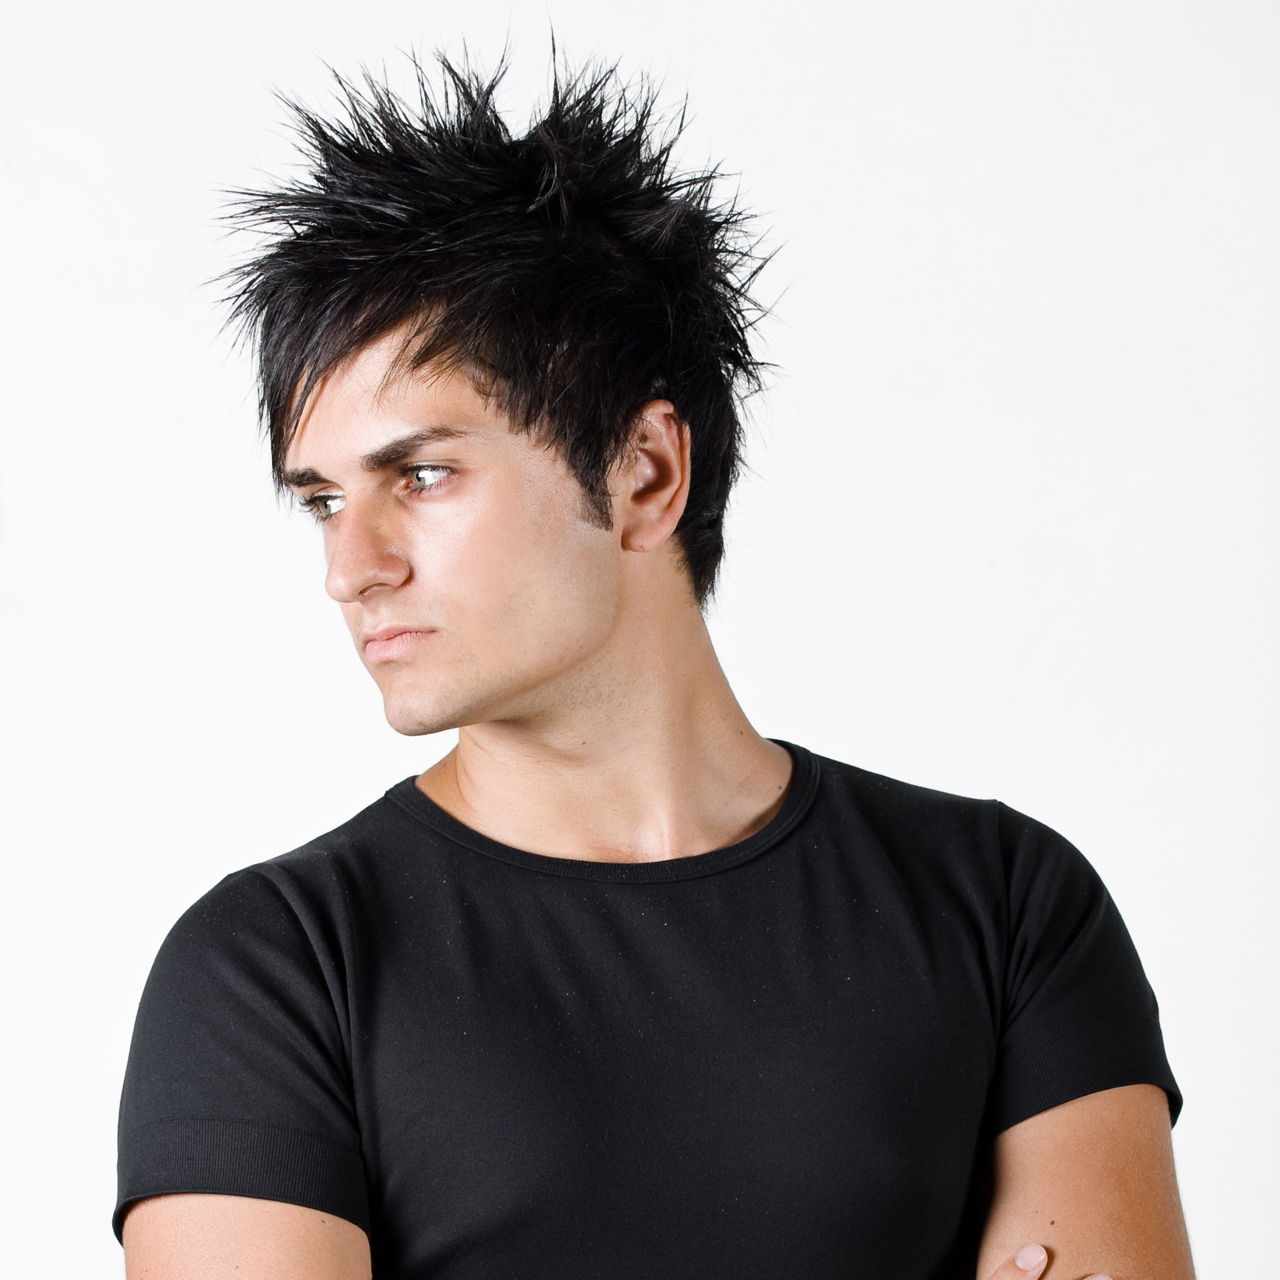 5 Cool Ways to Spike Your Hair - Men Wit